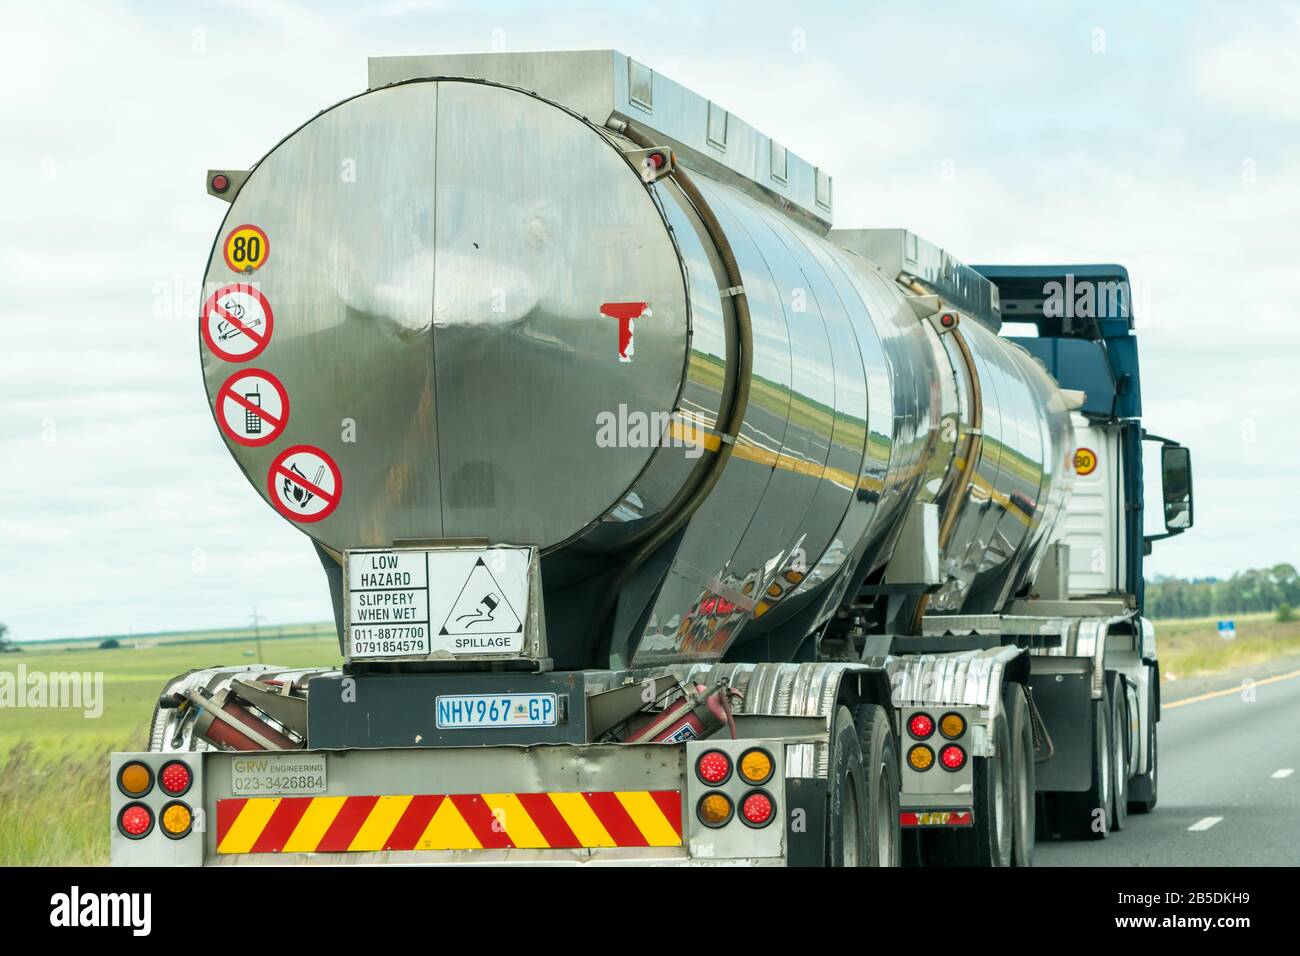 stainless steel tanker truck or vehicle carrying flammable liquid or fuel on a national road in Gauteng, South Africa Stock Photo